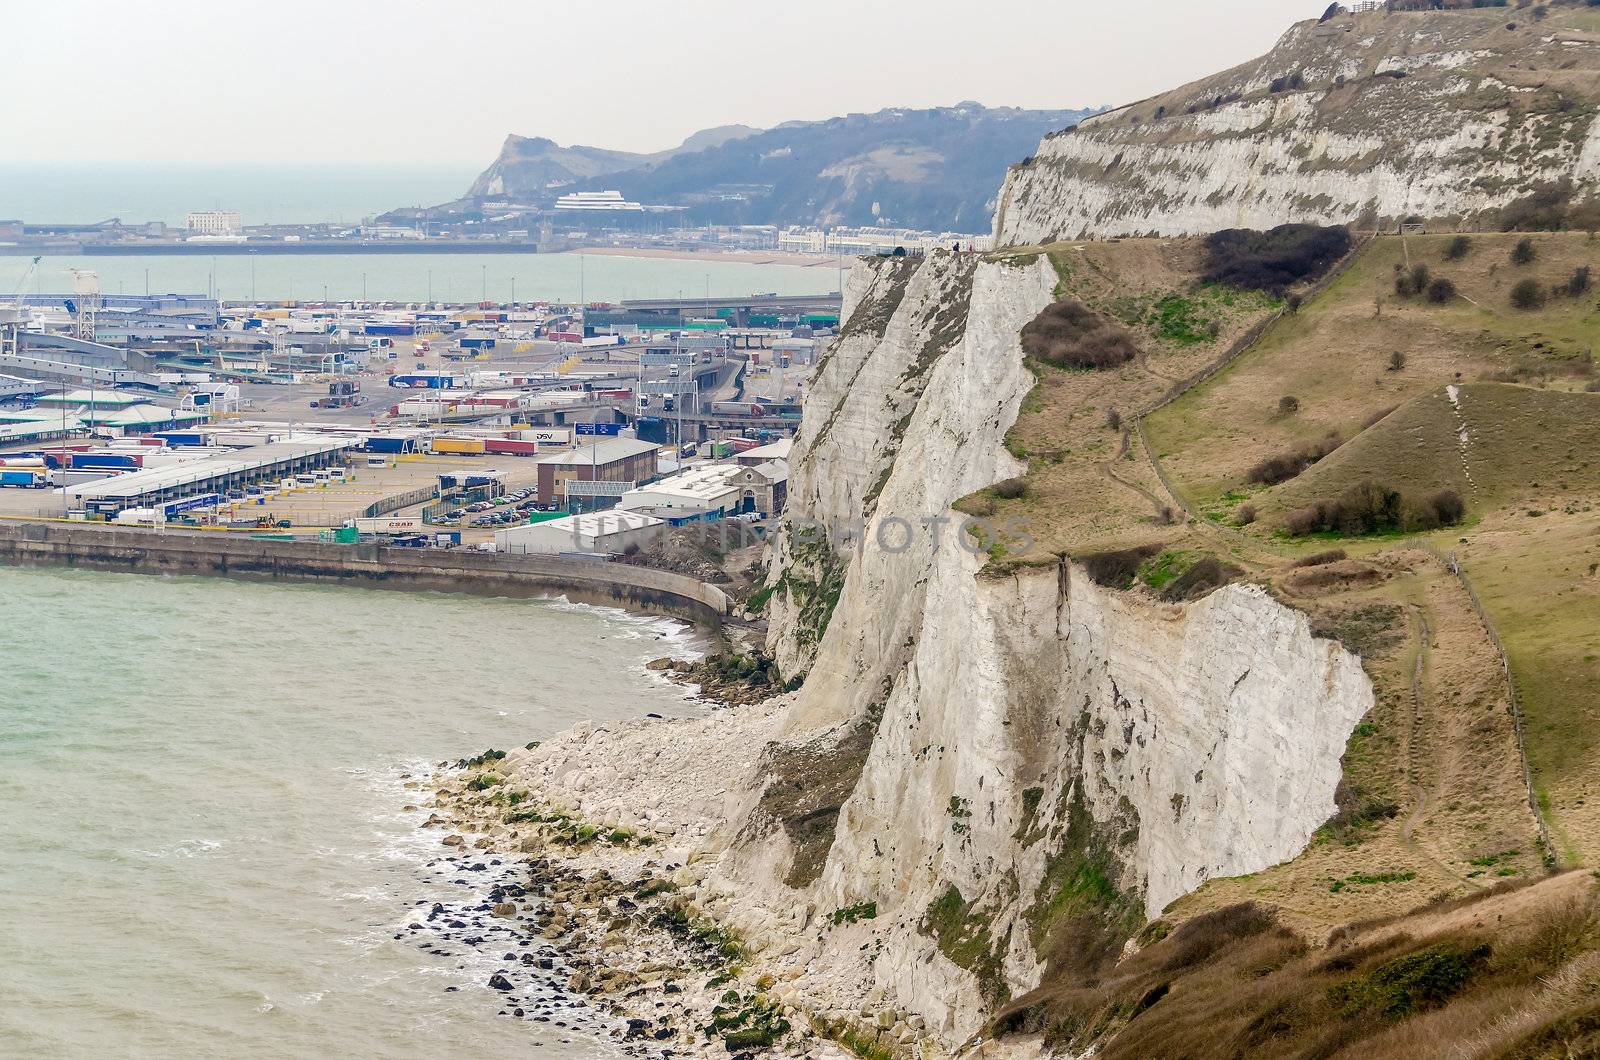 The White Cliffs of Dover facing Continental Europe on the English Channel